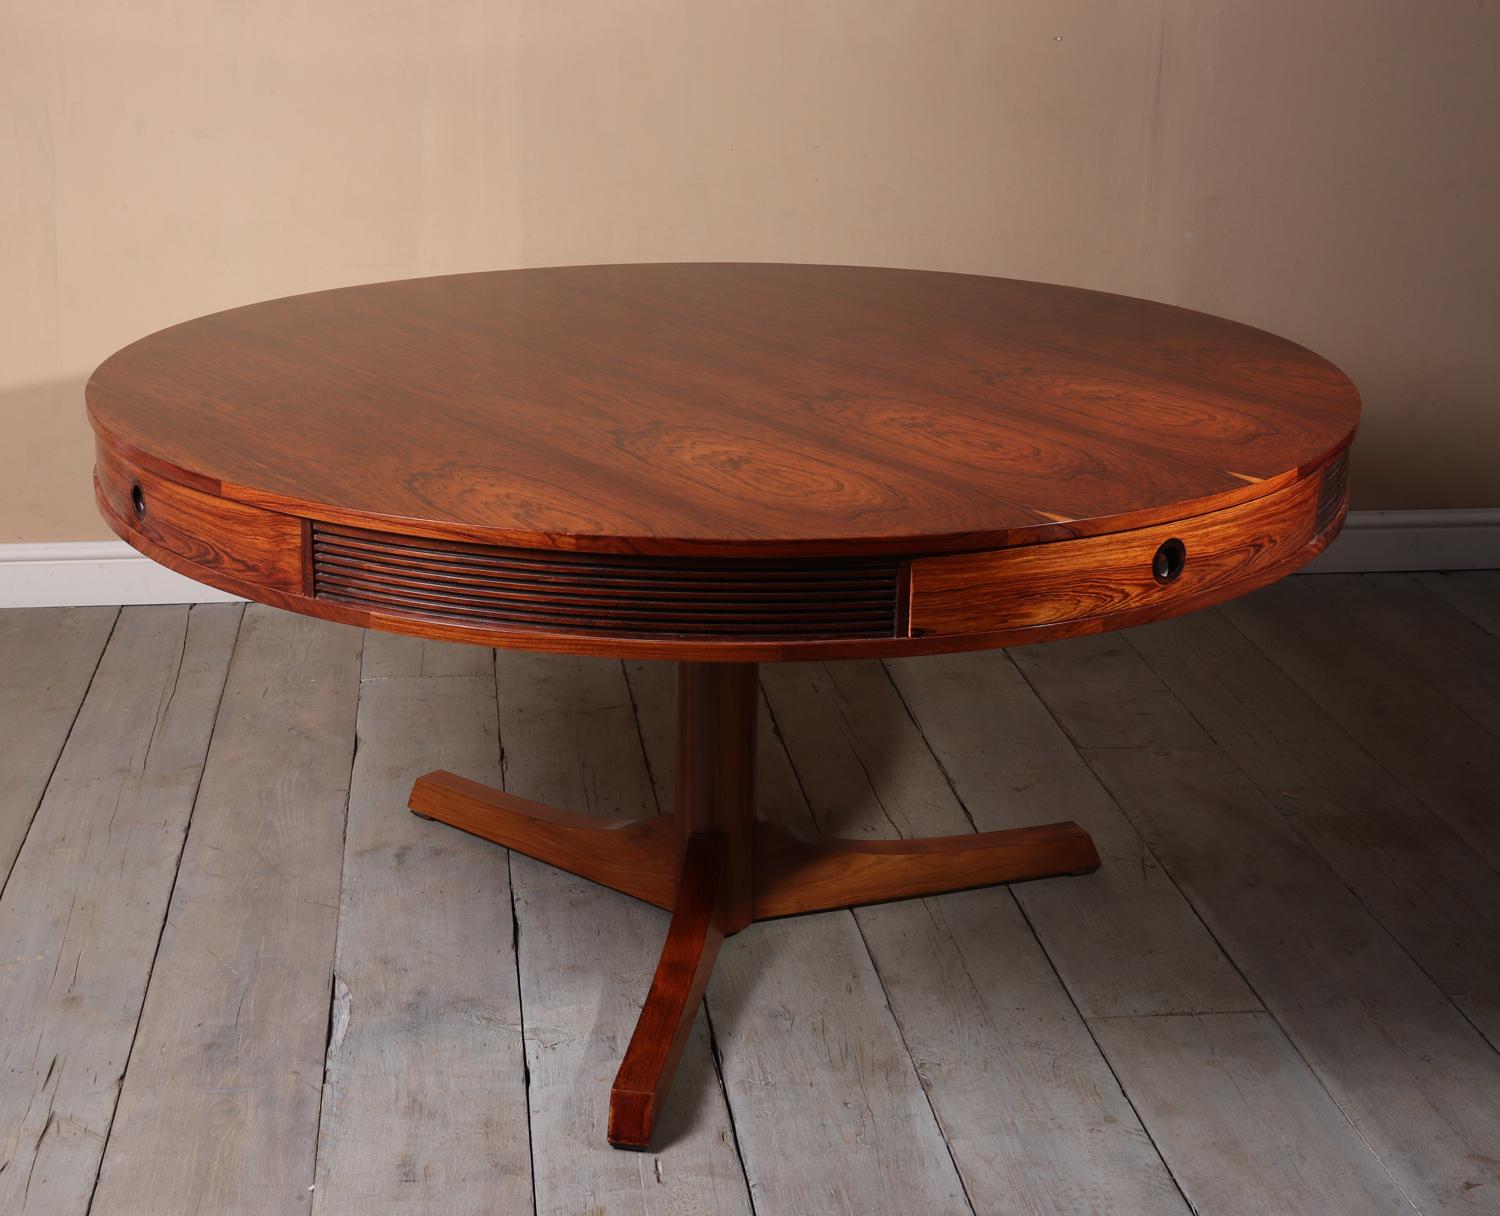 Rosewood drum table by Robert Heritage for Archie Shine, circa 1957.
Designed in 1957 by Robert Heritage and produced by Archie Shine in the late 1950s this drum table is part of the Bridgeford range that would have been sold through Heals in this